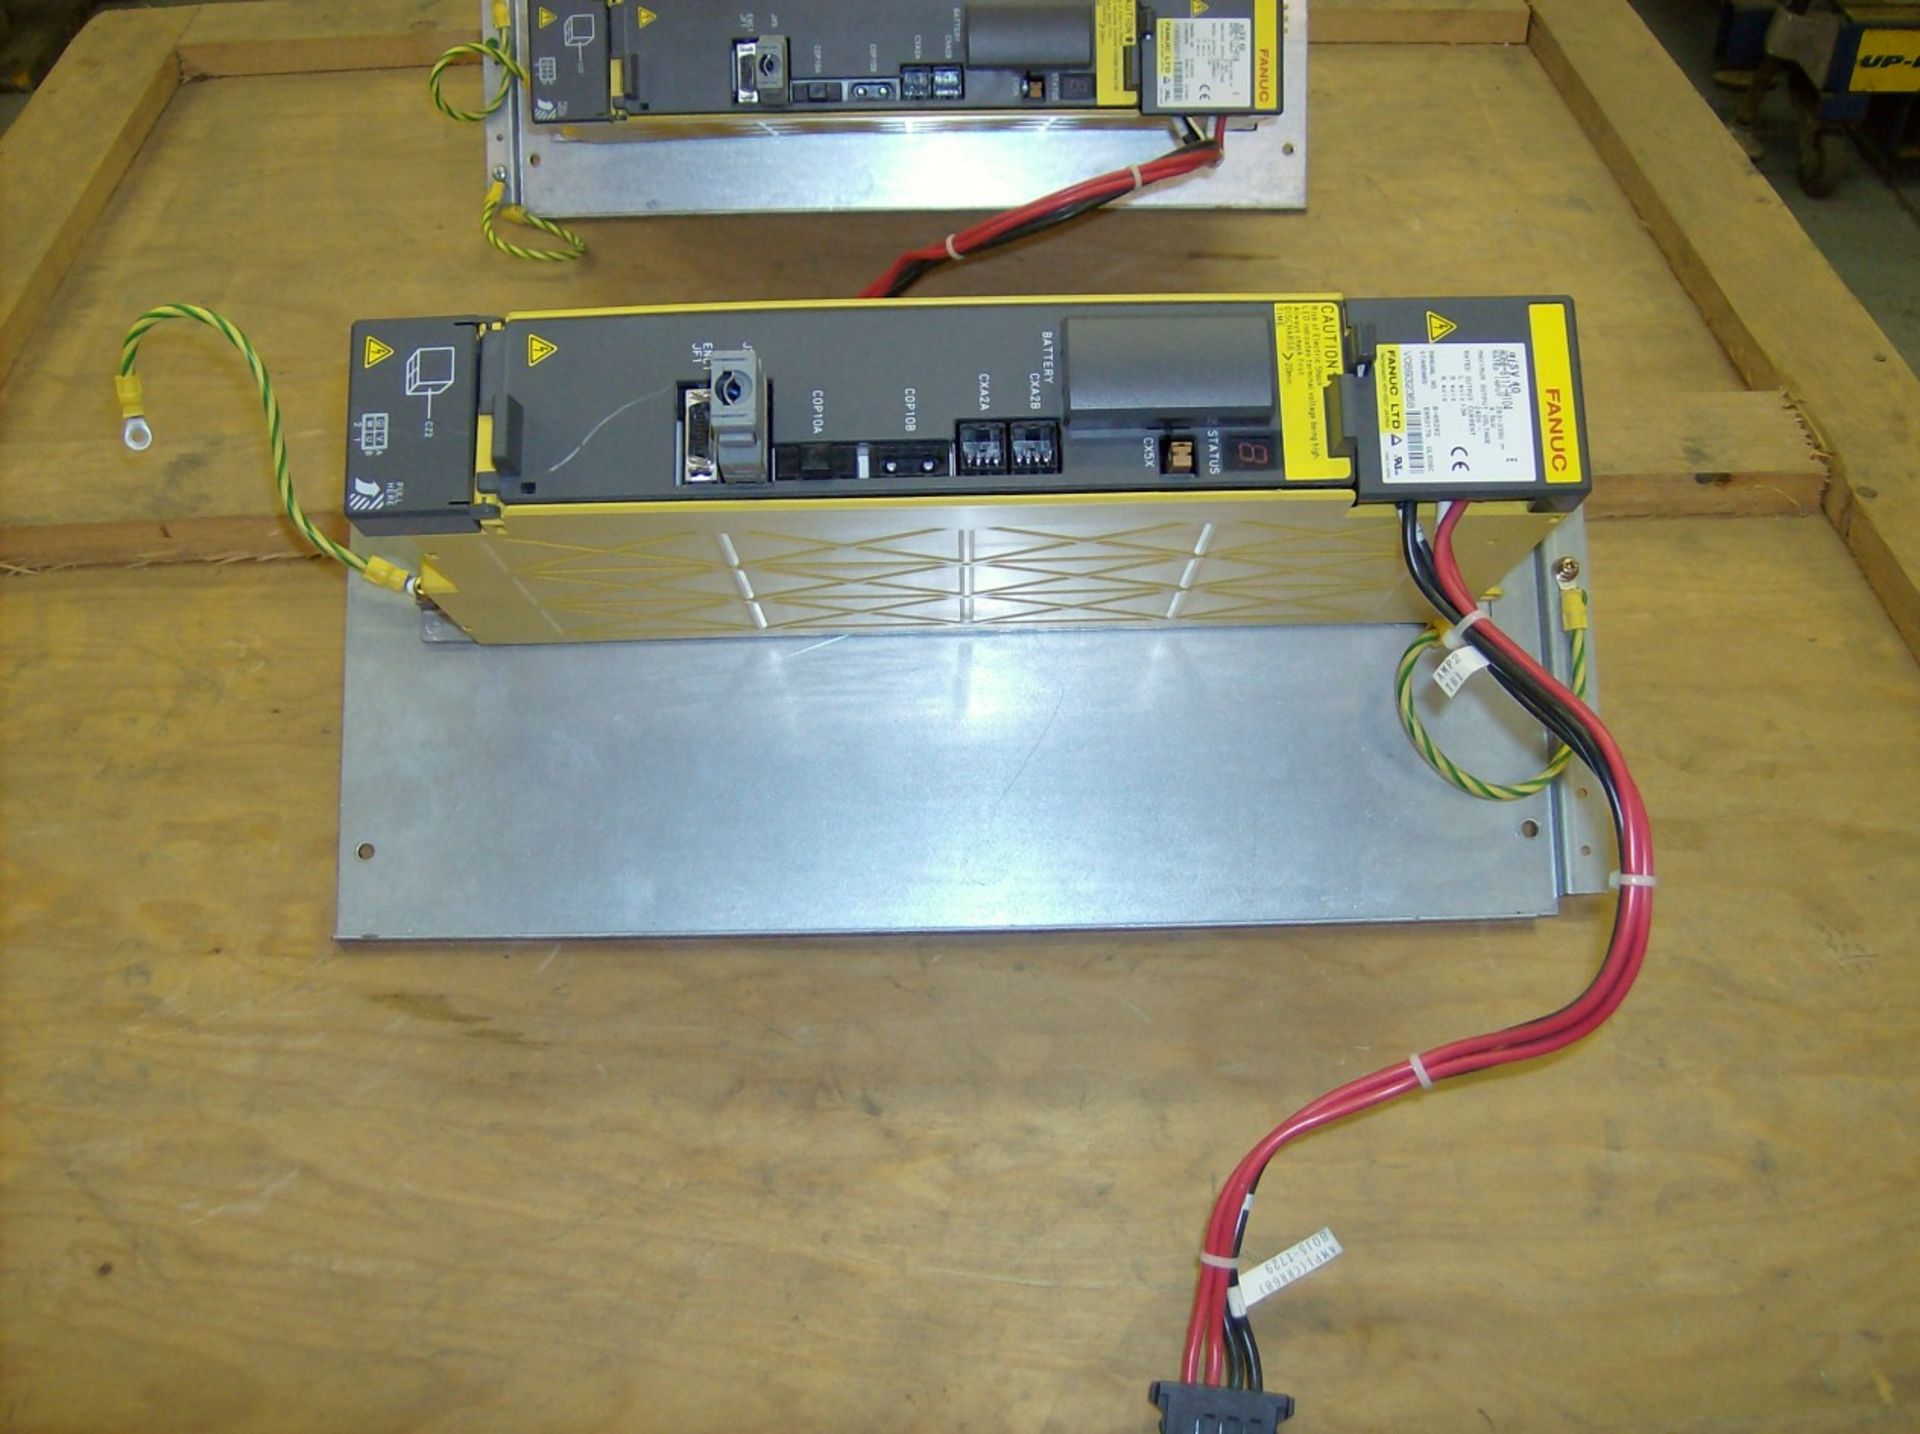 FANUC RJ3IC OR R30IA EXTERNAL DRIVE WITH BACK PLANE, SN V06932219, LOCATION ONTARIO CANADA. - Image 2 of 2